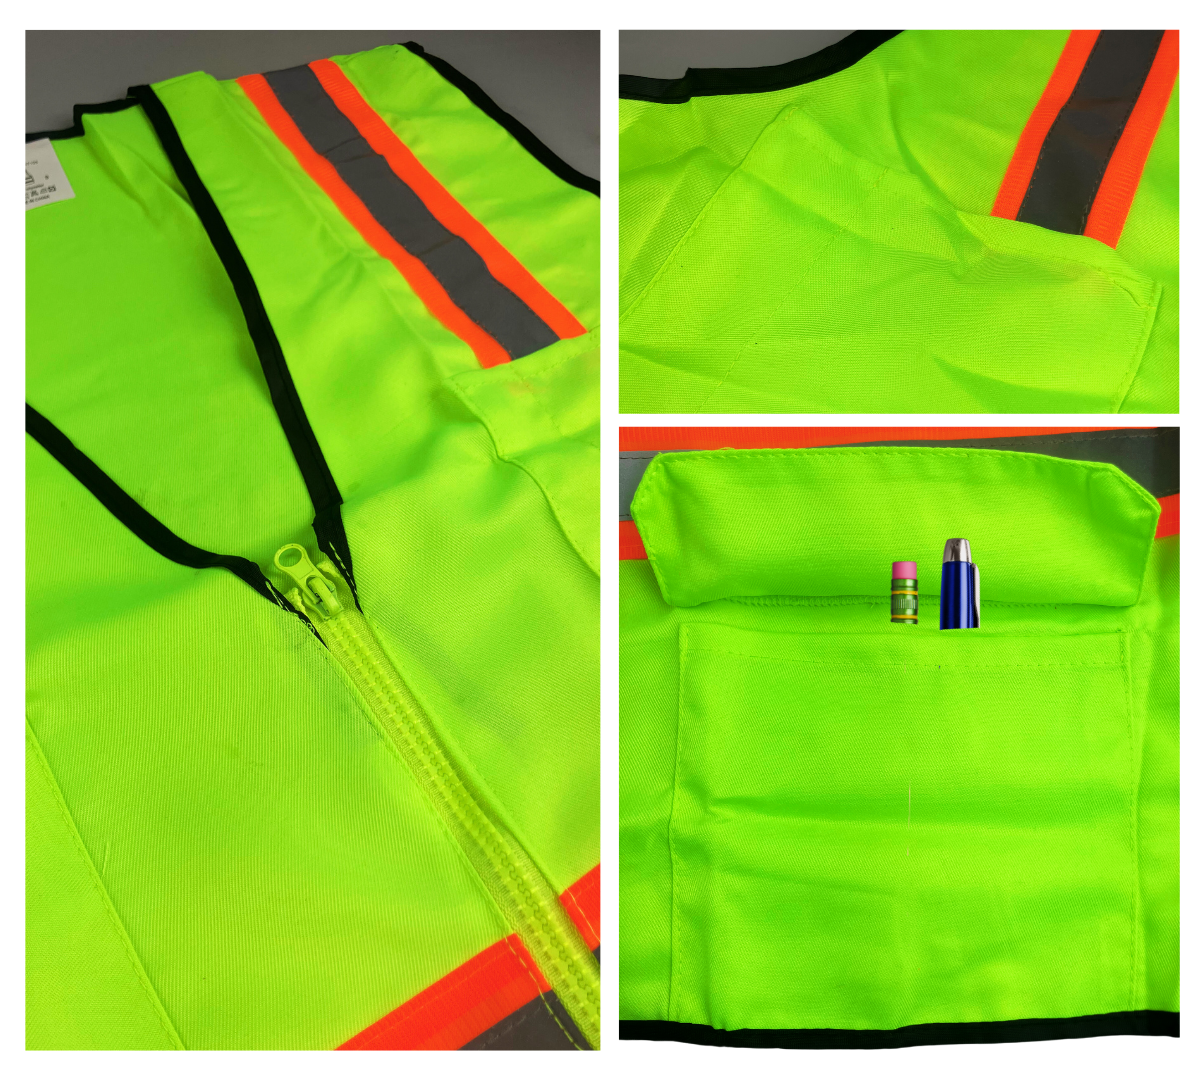 Bright Neon Green Safety Vest - Adult Size Medium  - SF-53718